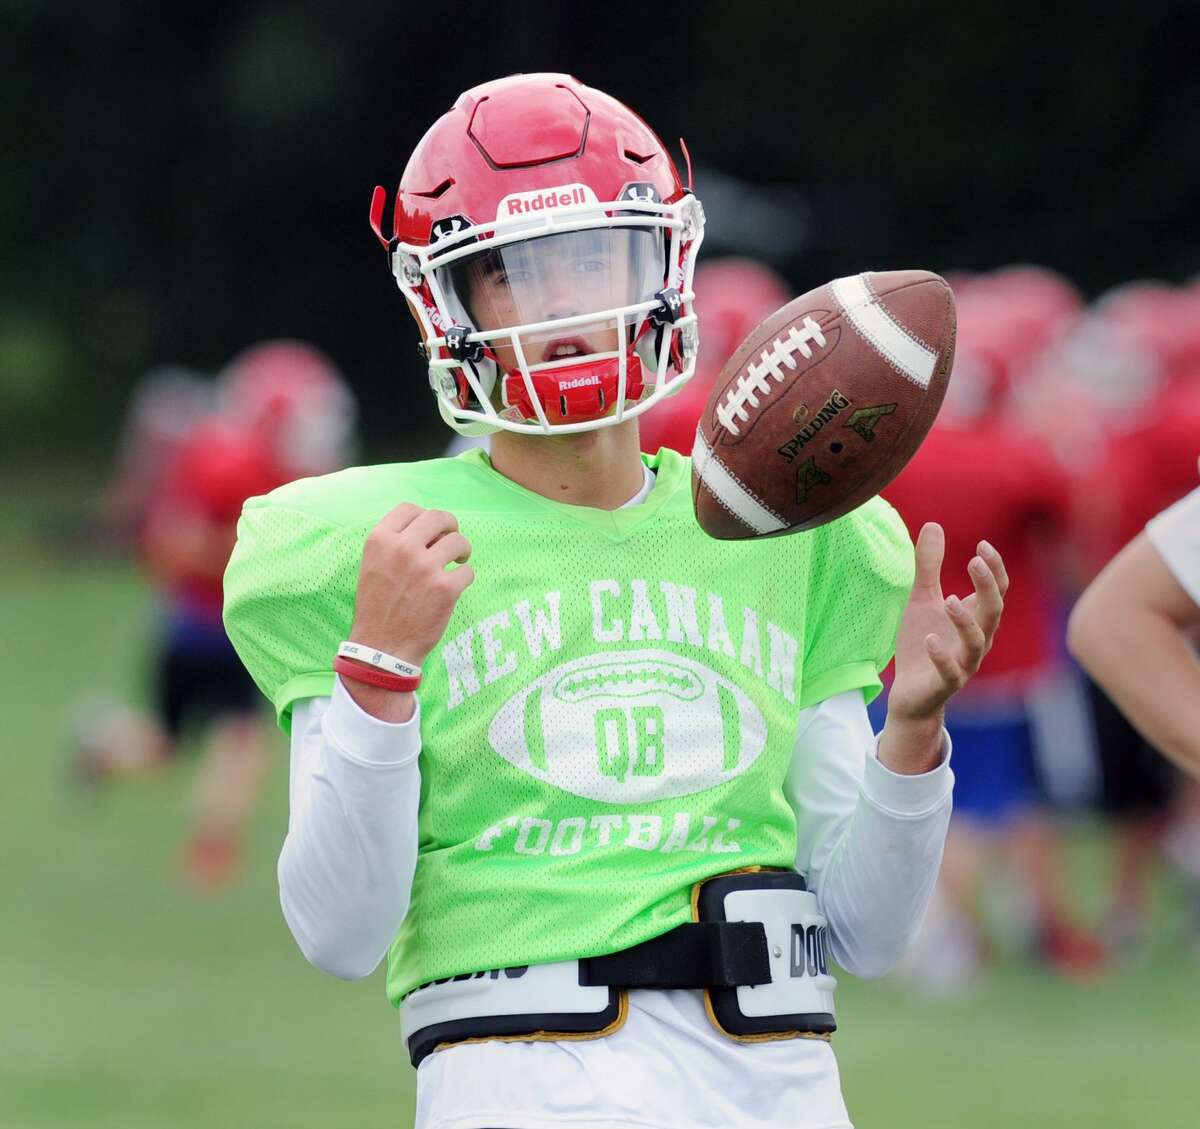 New Canaan High School quarterback Drew Pyne, a freshman, during New Canaan High School football practice at the school in New Canaan, Conn., Thursday, Sept. 1, 2016.